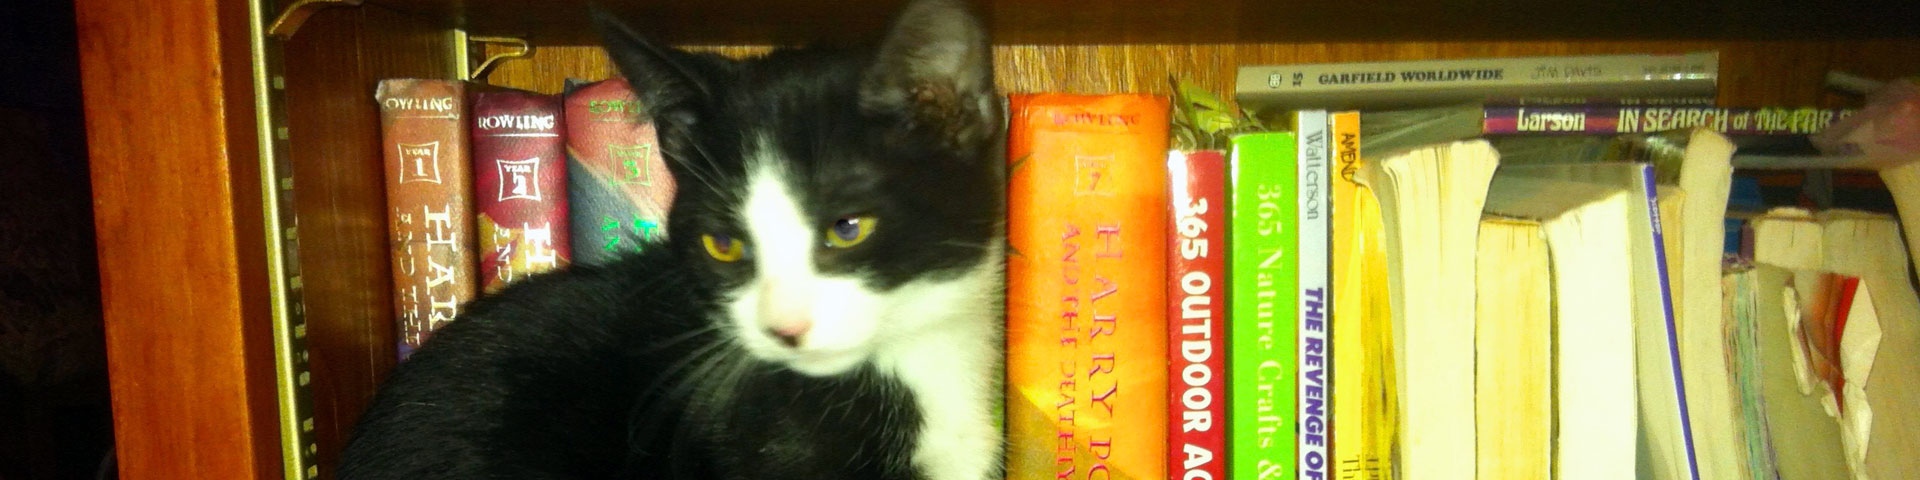 A black-and-white kitten sits on a bookshelf.